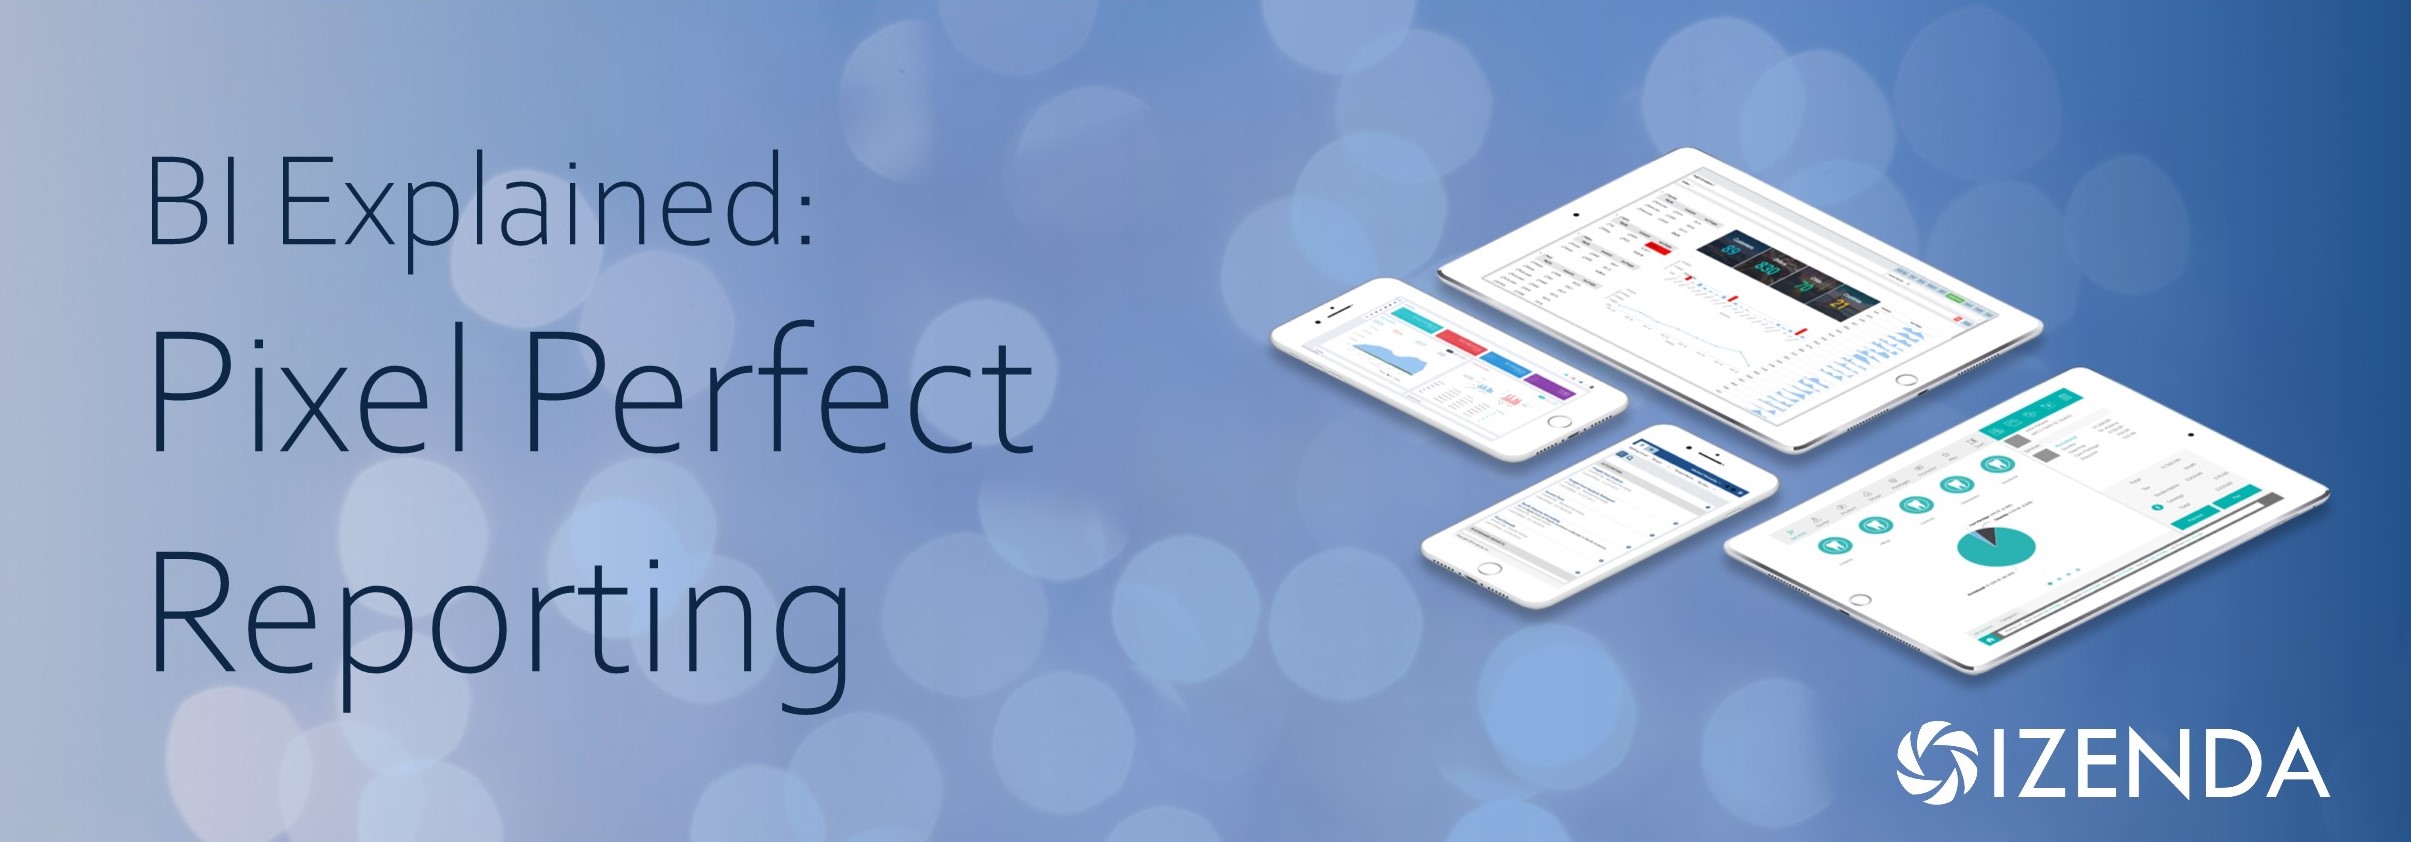 pixel perfect reporting with BI and reporting software explained